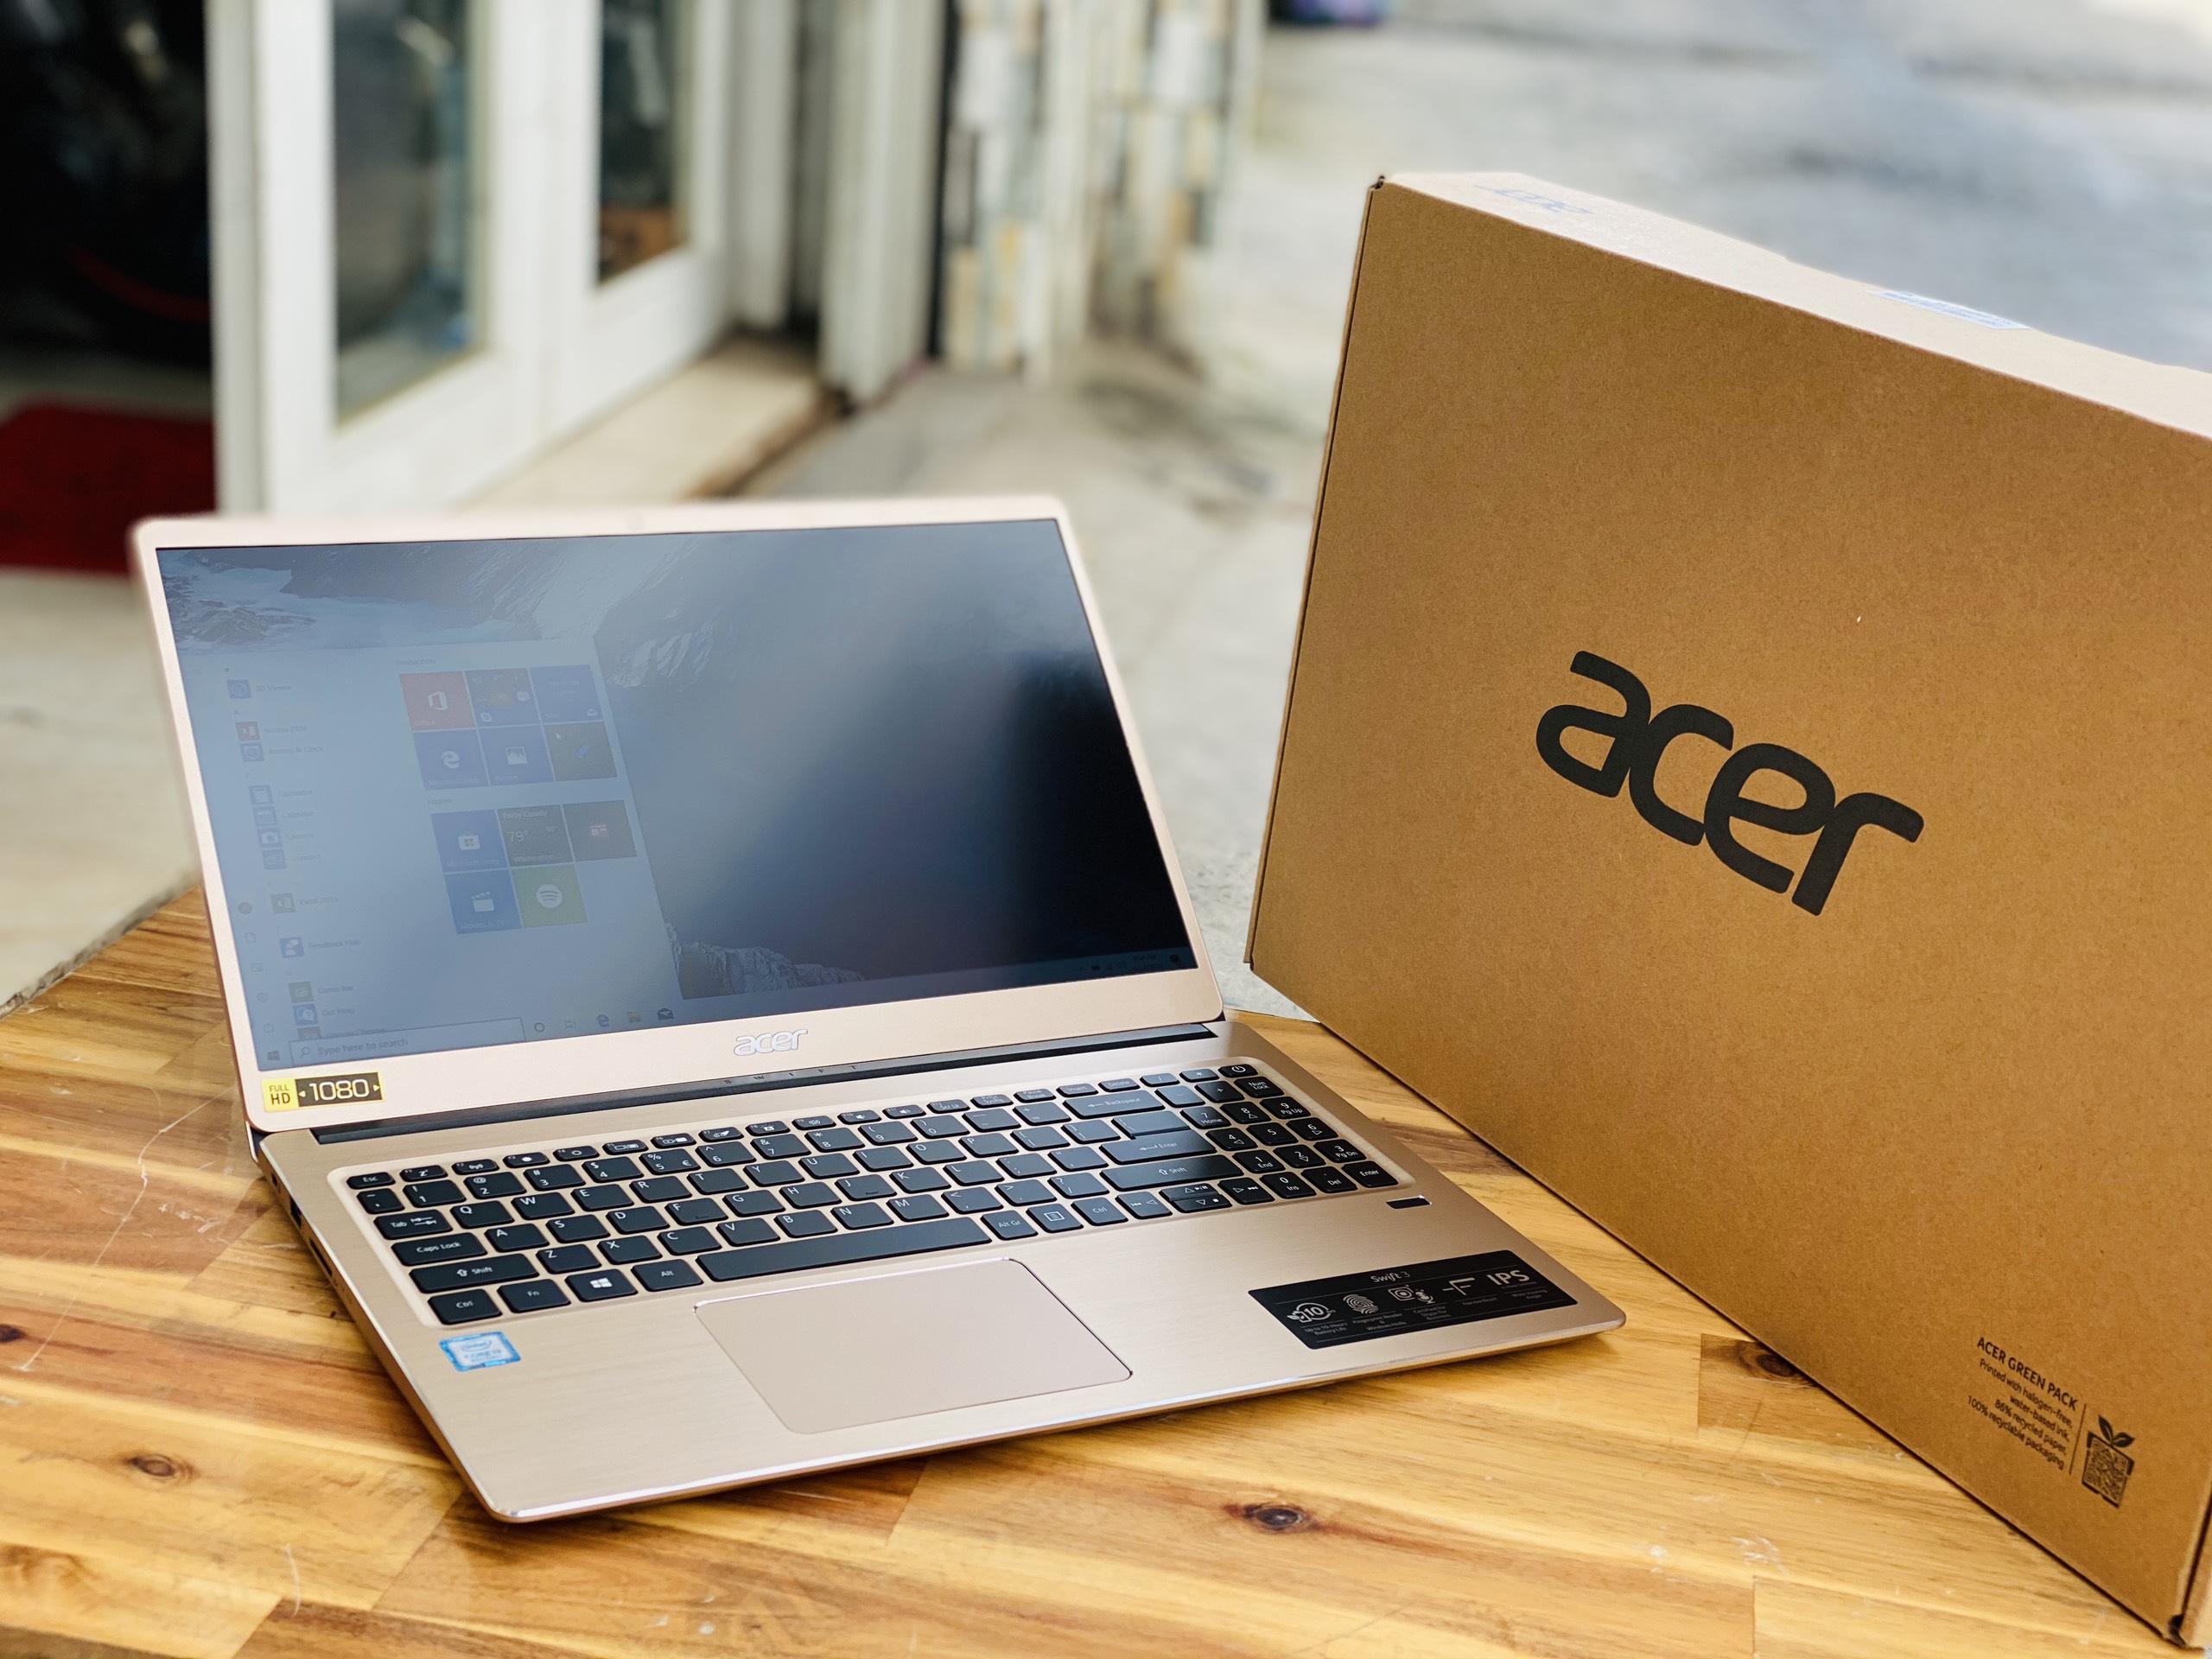 Acer Swift 3 sở hữu công nghệ Acer ComfyView